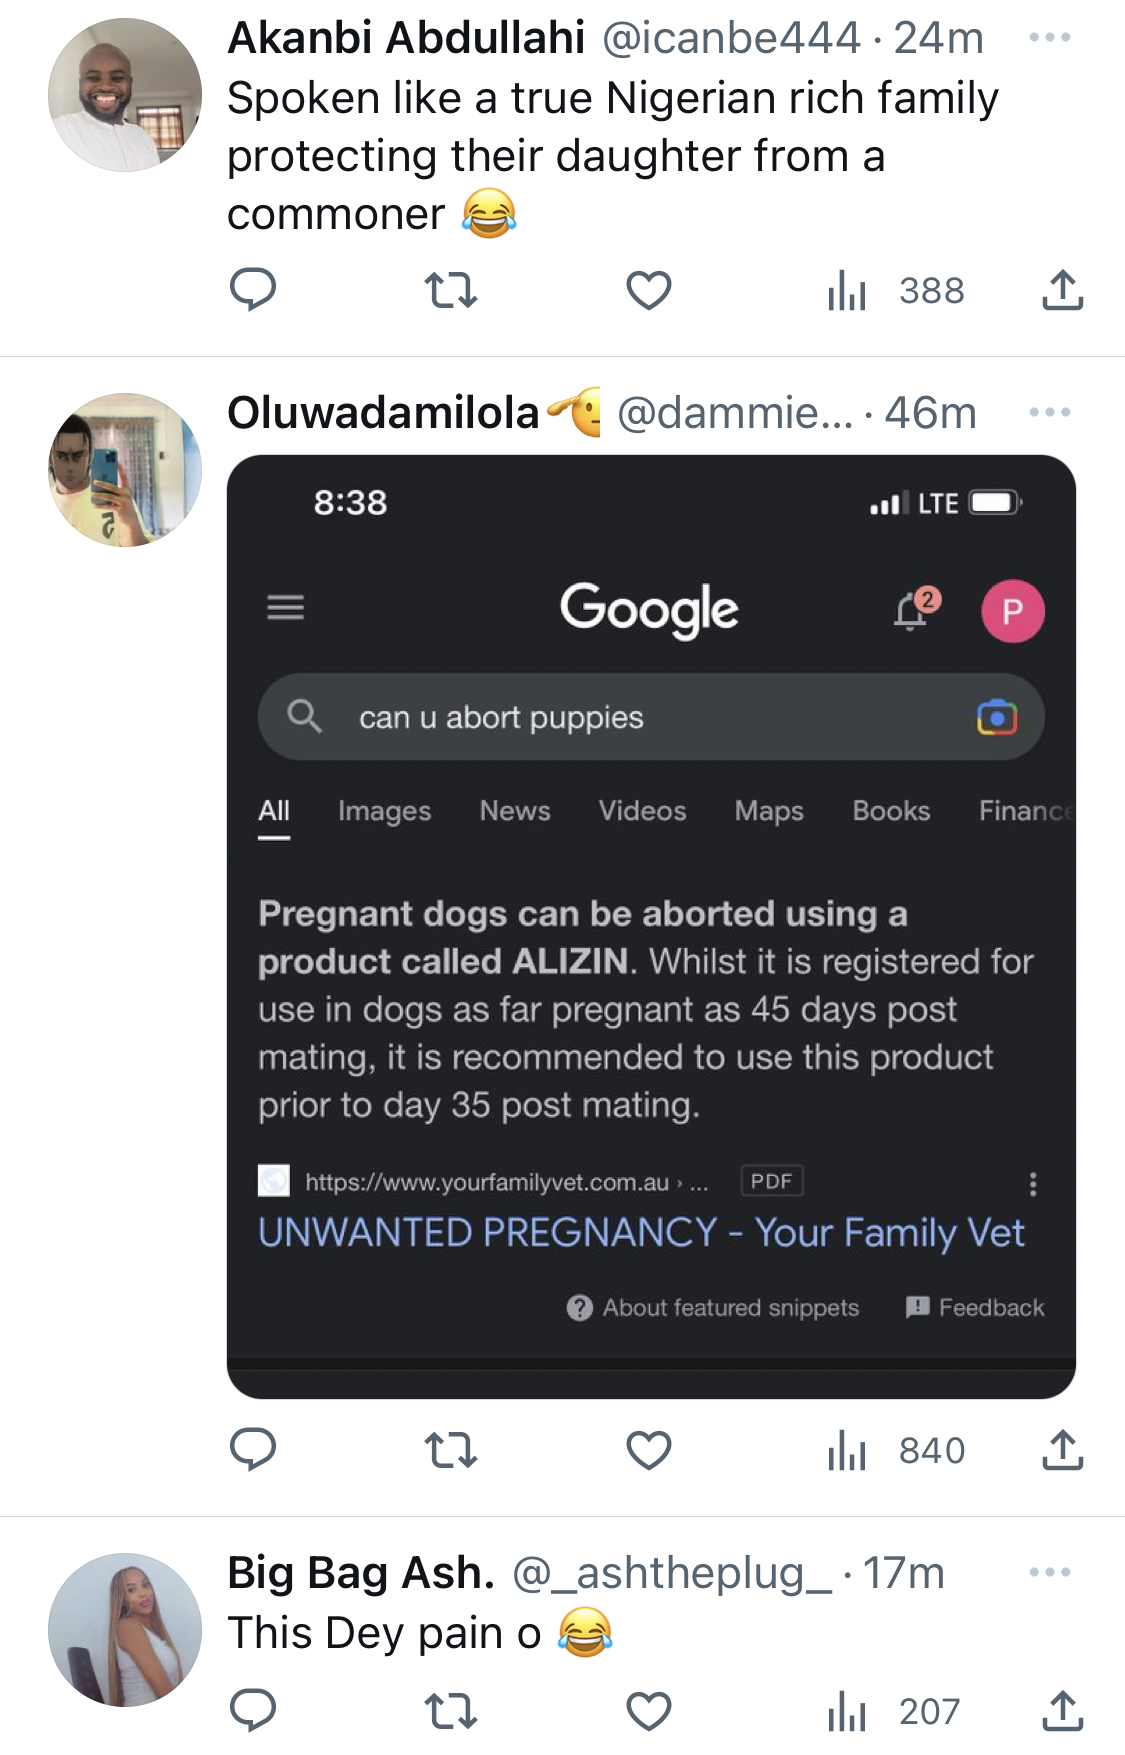 Where can I do abortion for her - Woman laments as her dog comes home with pregnancy from neighbor’s dog [video]